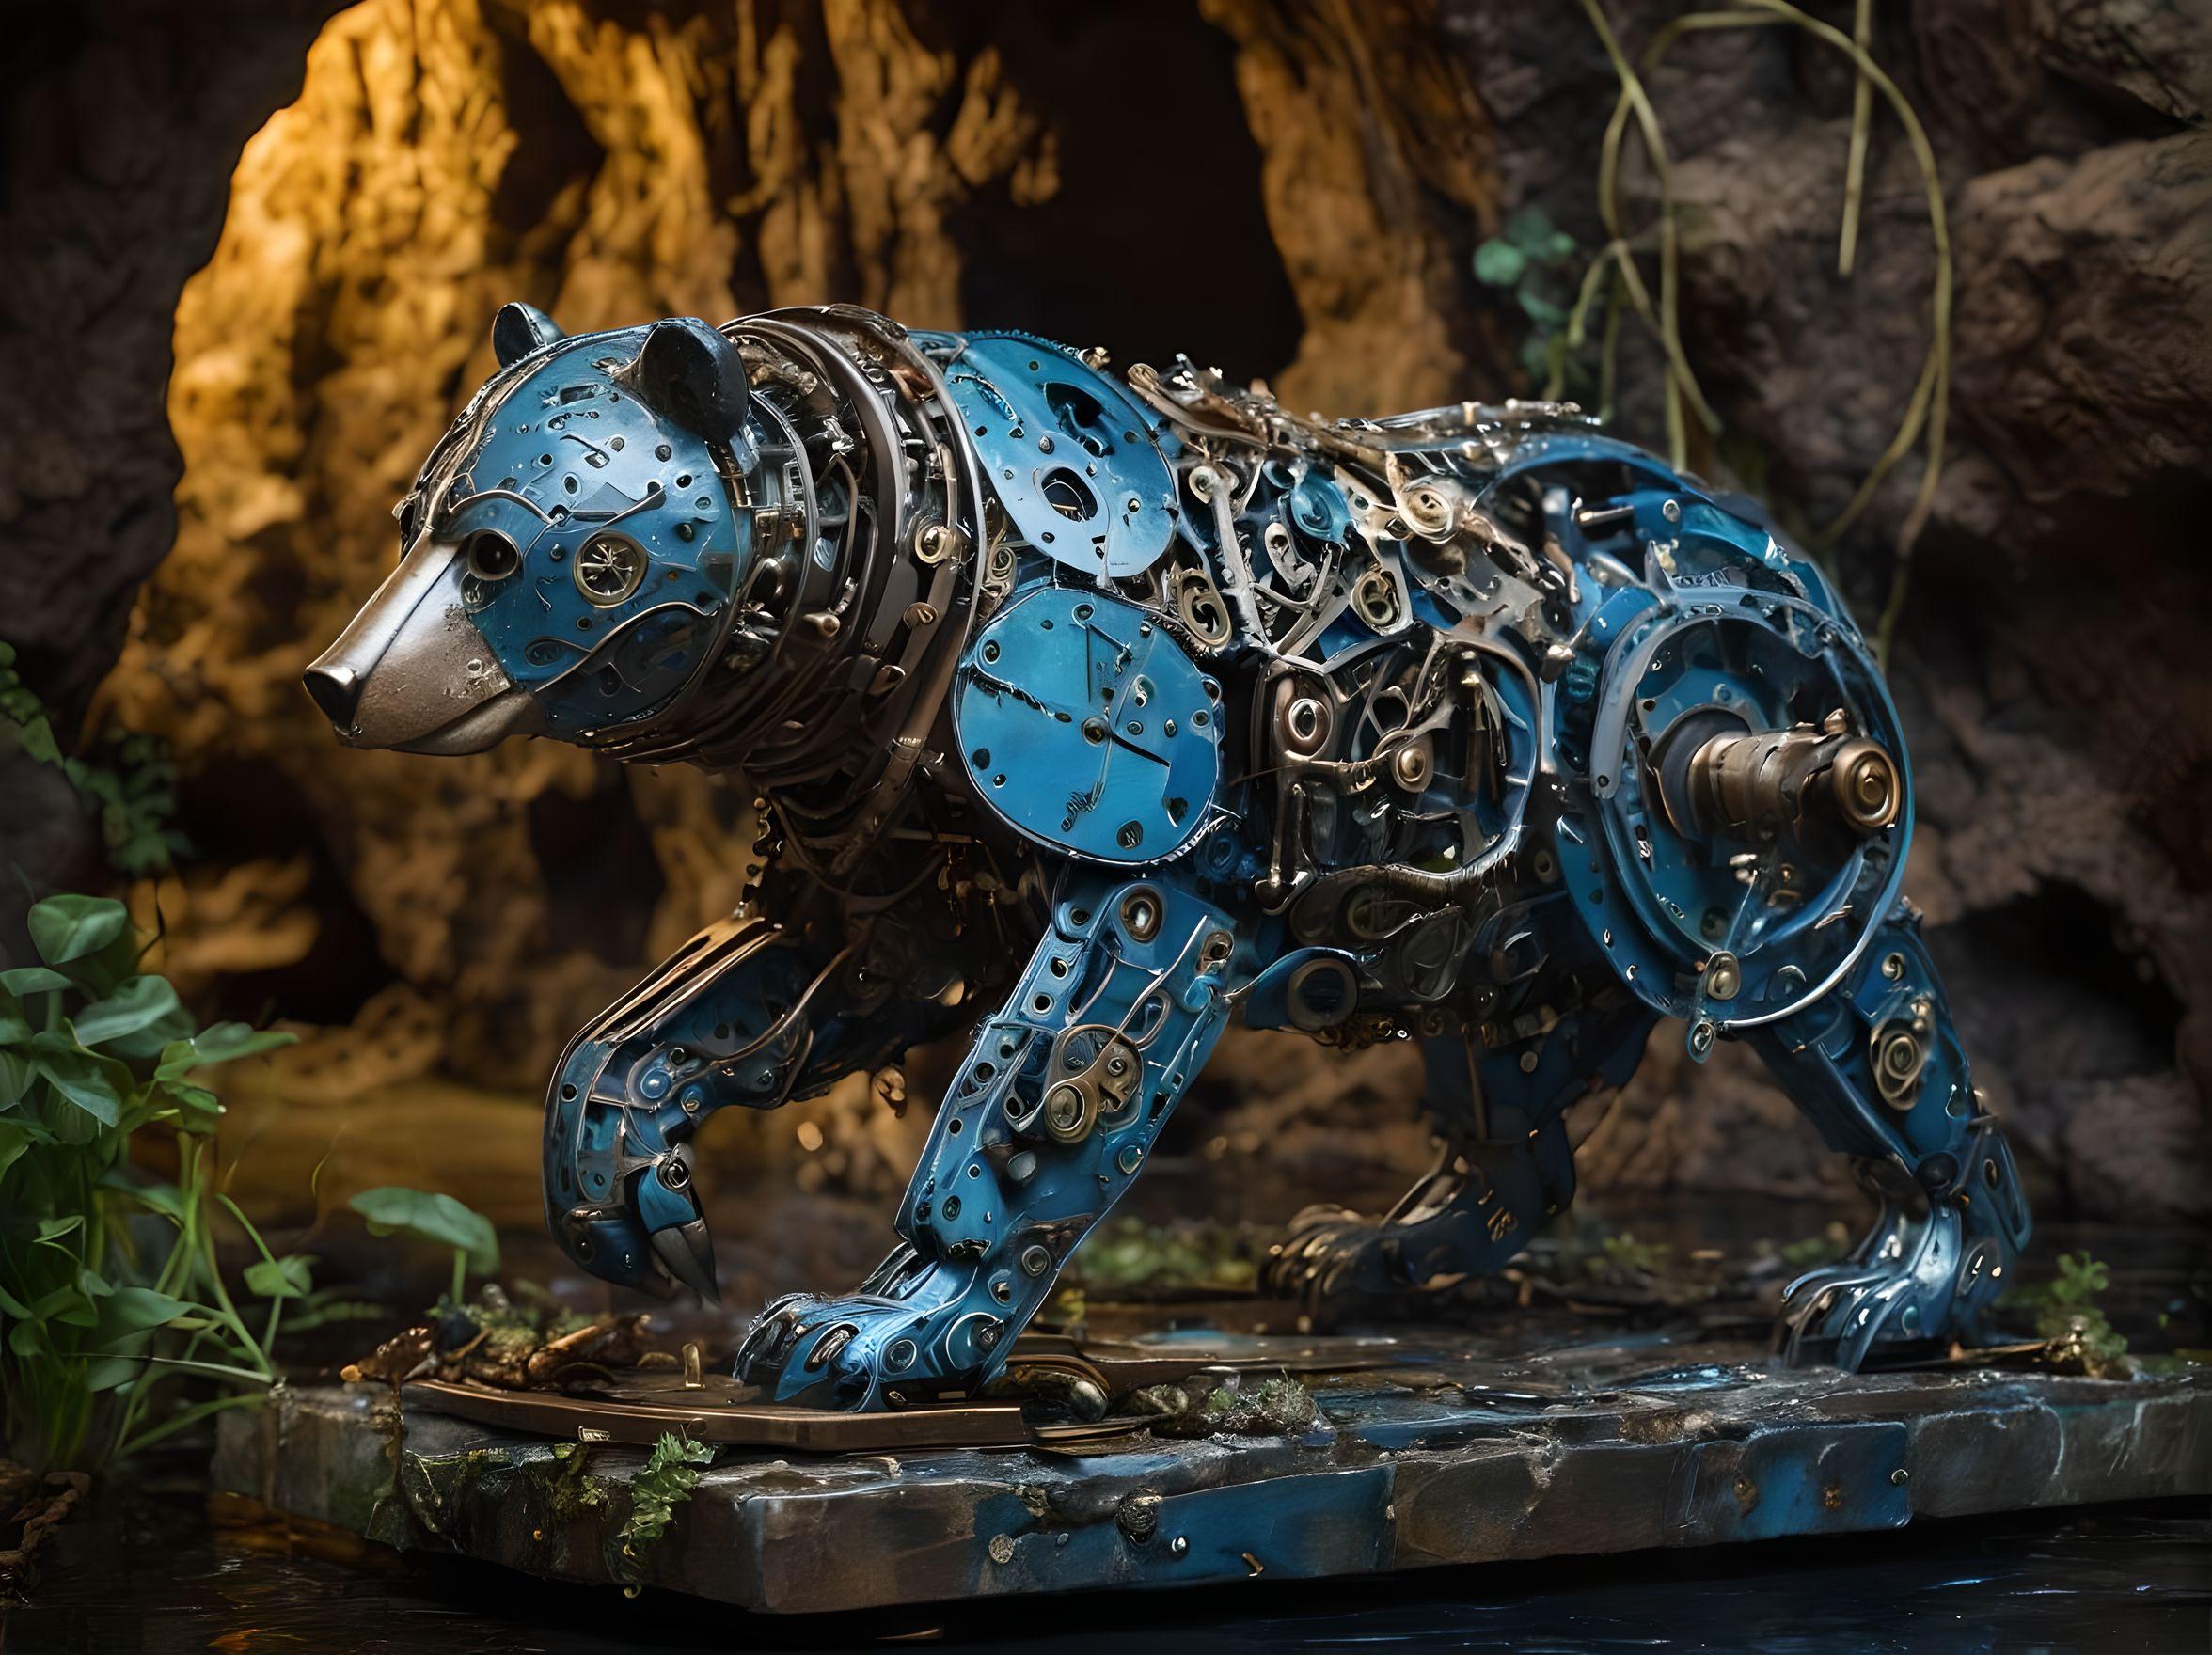 automaton bear completely made out of metallic parts in a steampunk fashion is standing on a platform surrounded by water in a dark cave that has luminescent vines climbing between the rocks in the background. the bear is on all fours and has its head made out of metallic parts as well - gears- clocks- chains. there is no greenery- the ledge is made out of stone and the coloring is blue and tan.